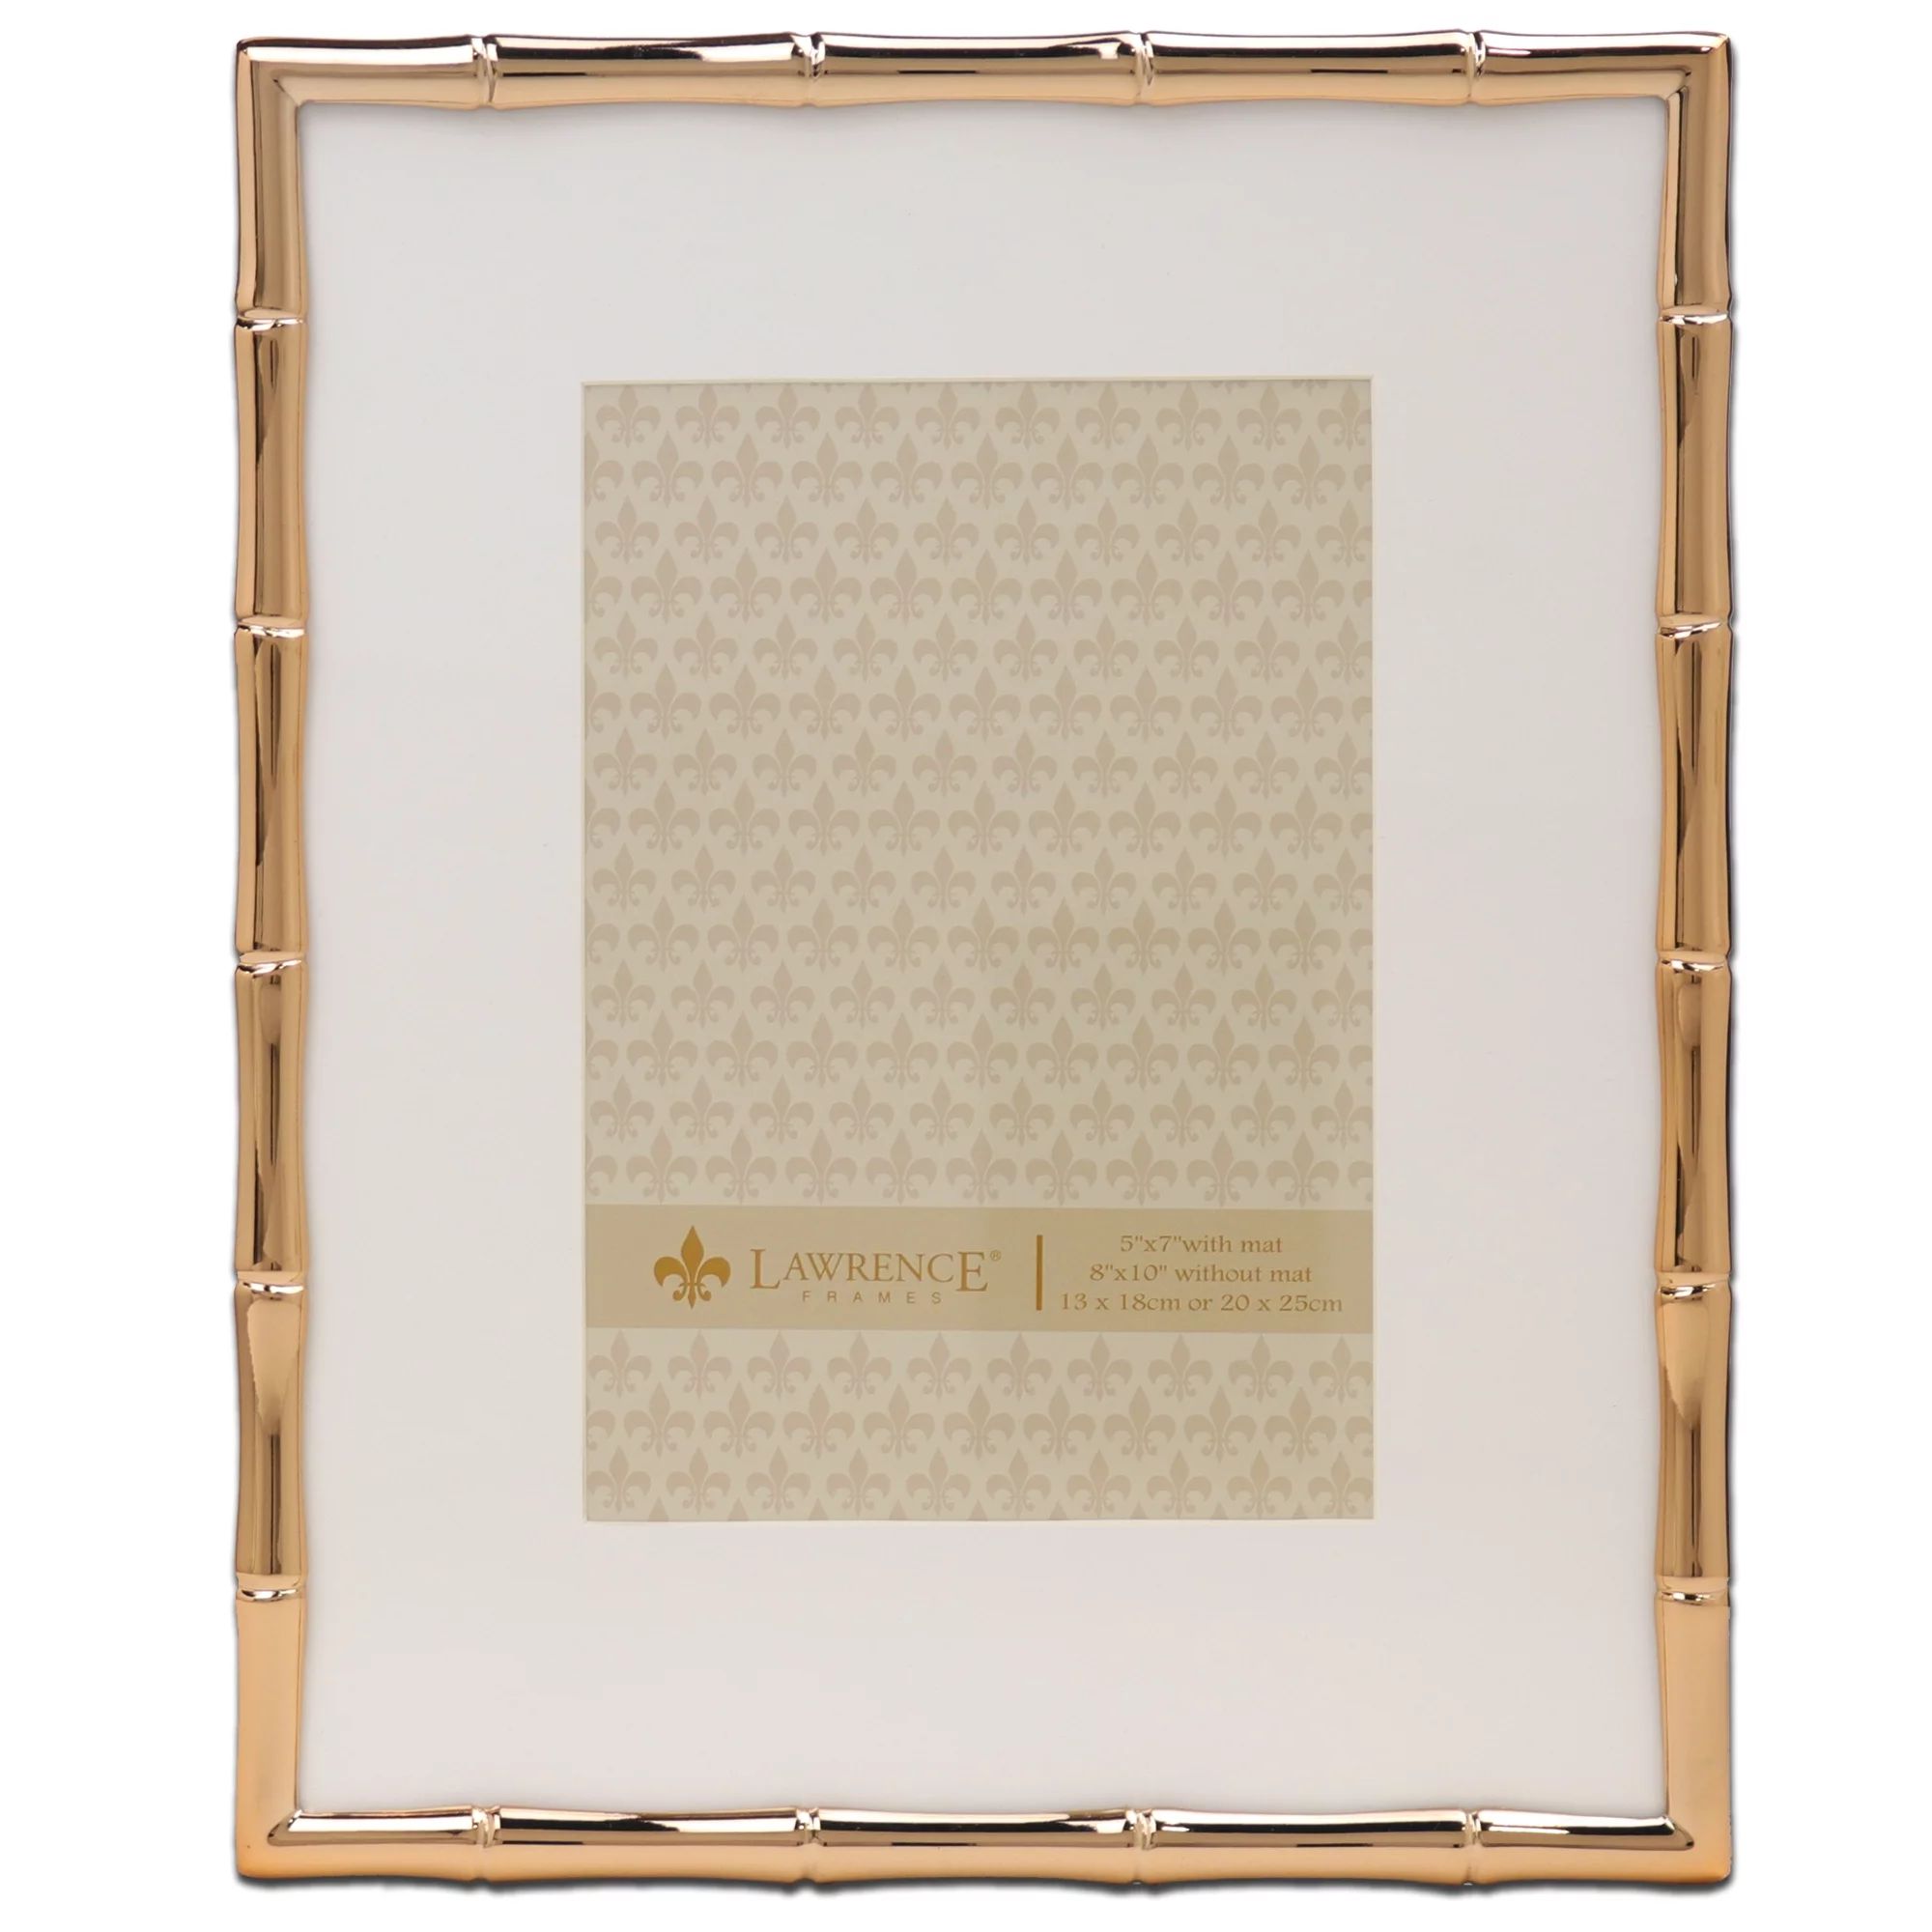 8x10 High Quality Polished Gold Cast Metal Picture Frame - Bamboo Design with Mat for 5x7 | Walmart (US)